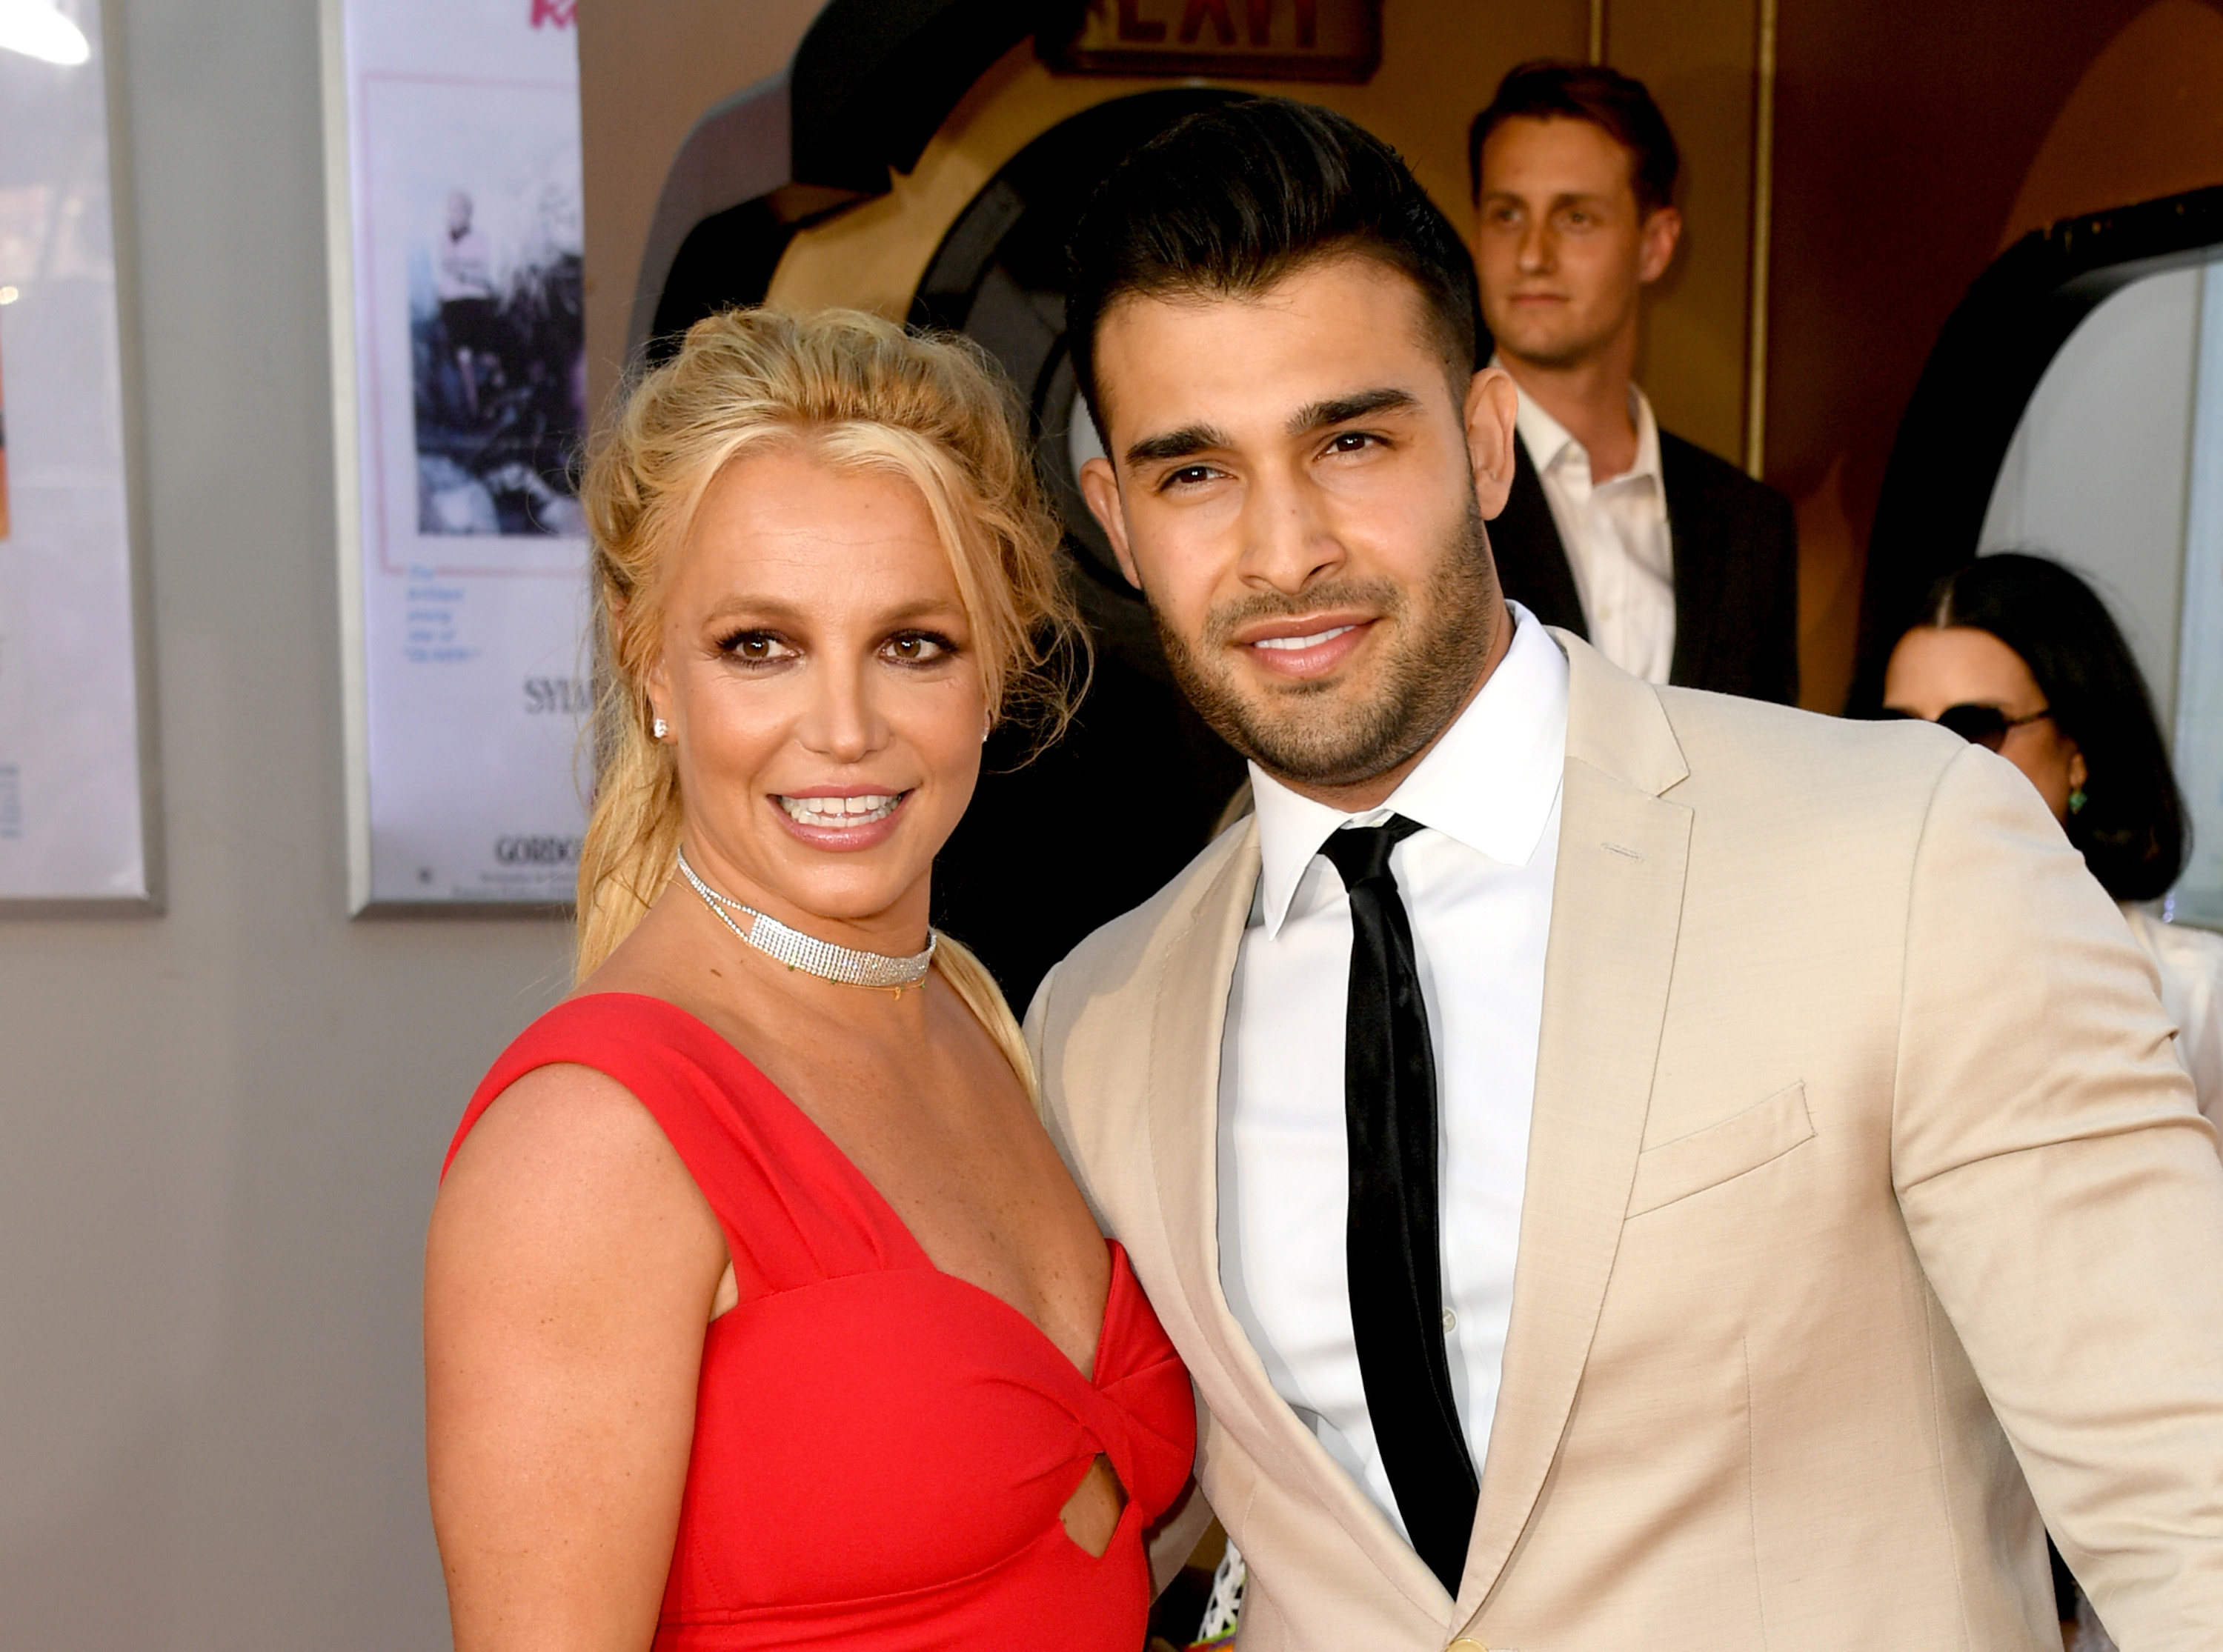 A close-up of Britney and Sam smiling